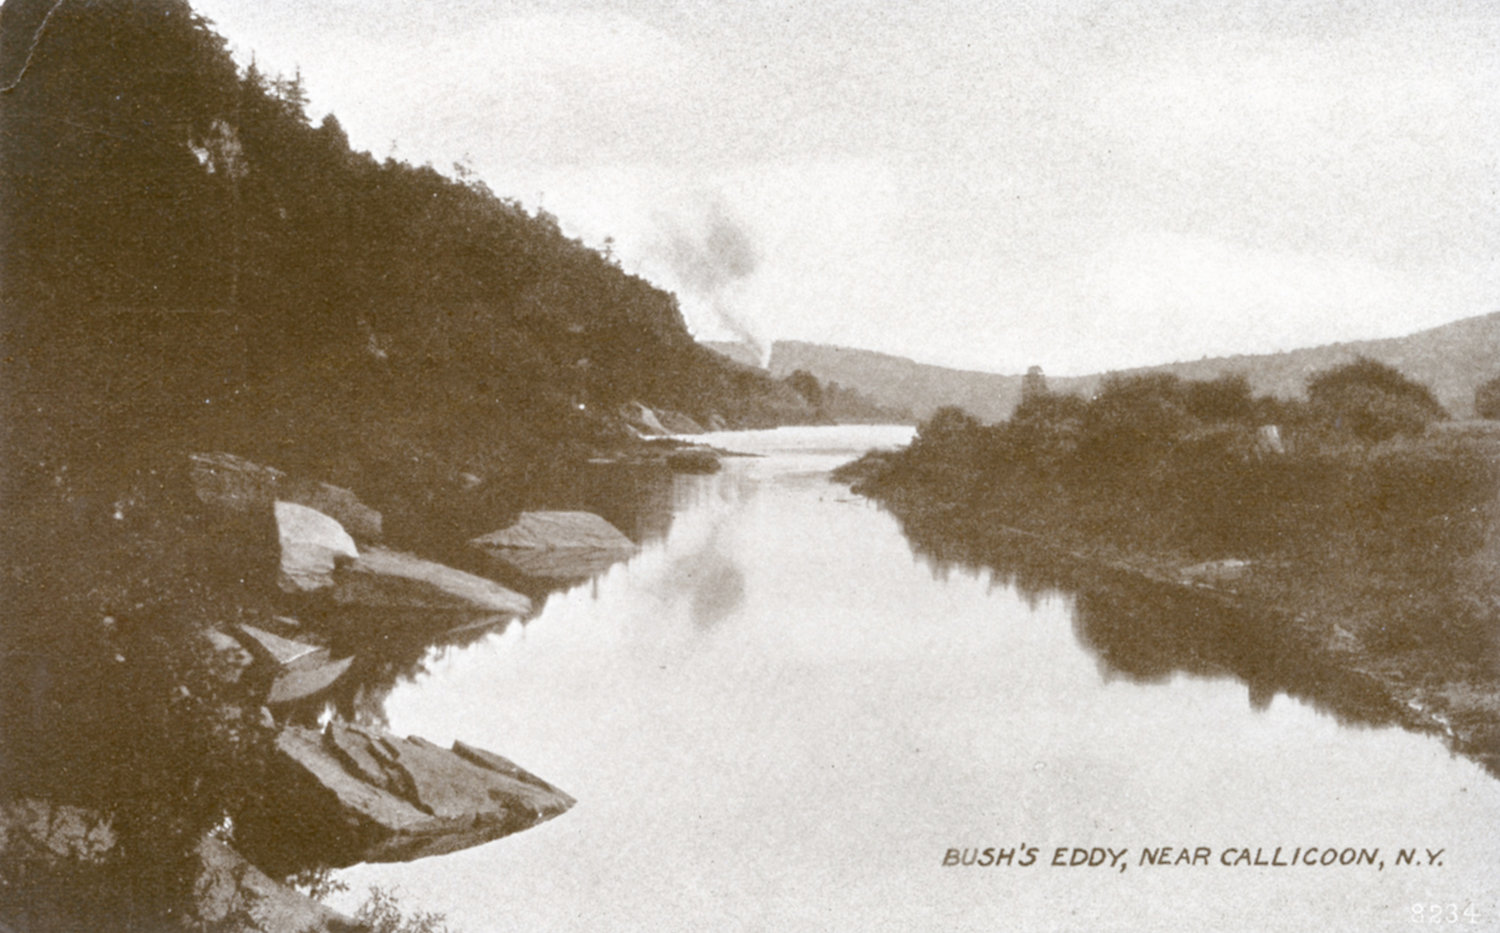 Bush's Eddy: 

The plume from an Erie locomotive rises in the distance in this postcard view of Bush's Eddy, enough to reflect in the Delaware River. In 1915 Charles Stoehr and John Dering of Callicoon placed 10,000 wall-eyed pike fingerlings in the river here, projecting that in two or three years, with repeated stocking being planned, the pike population was expected to be excellent.